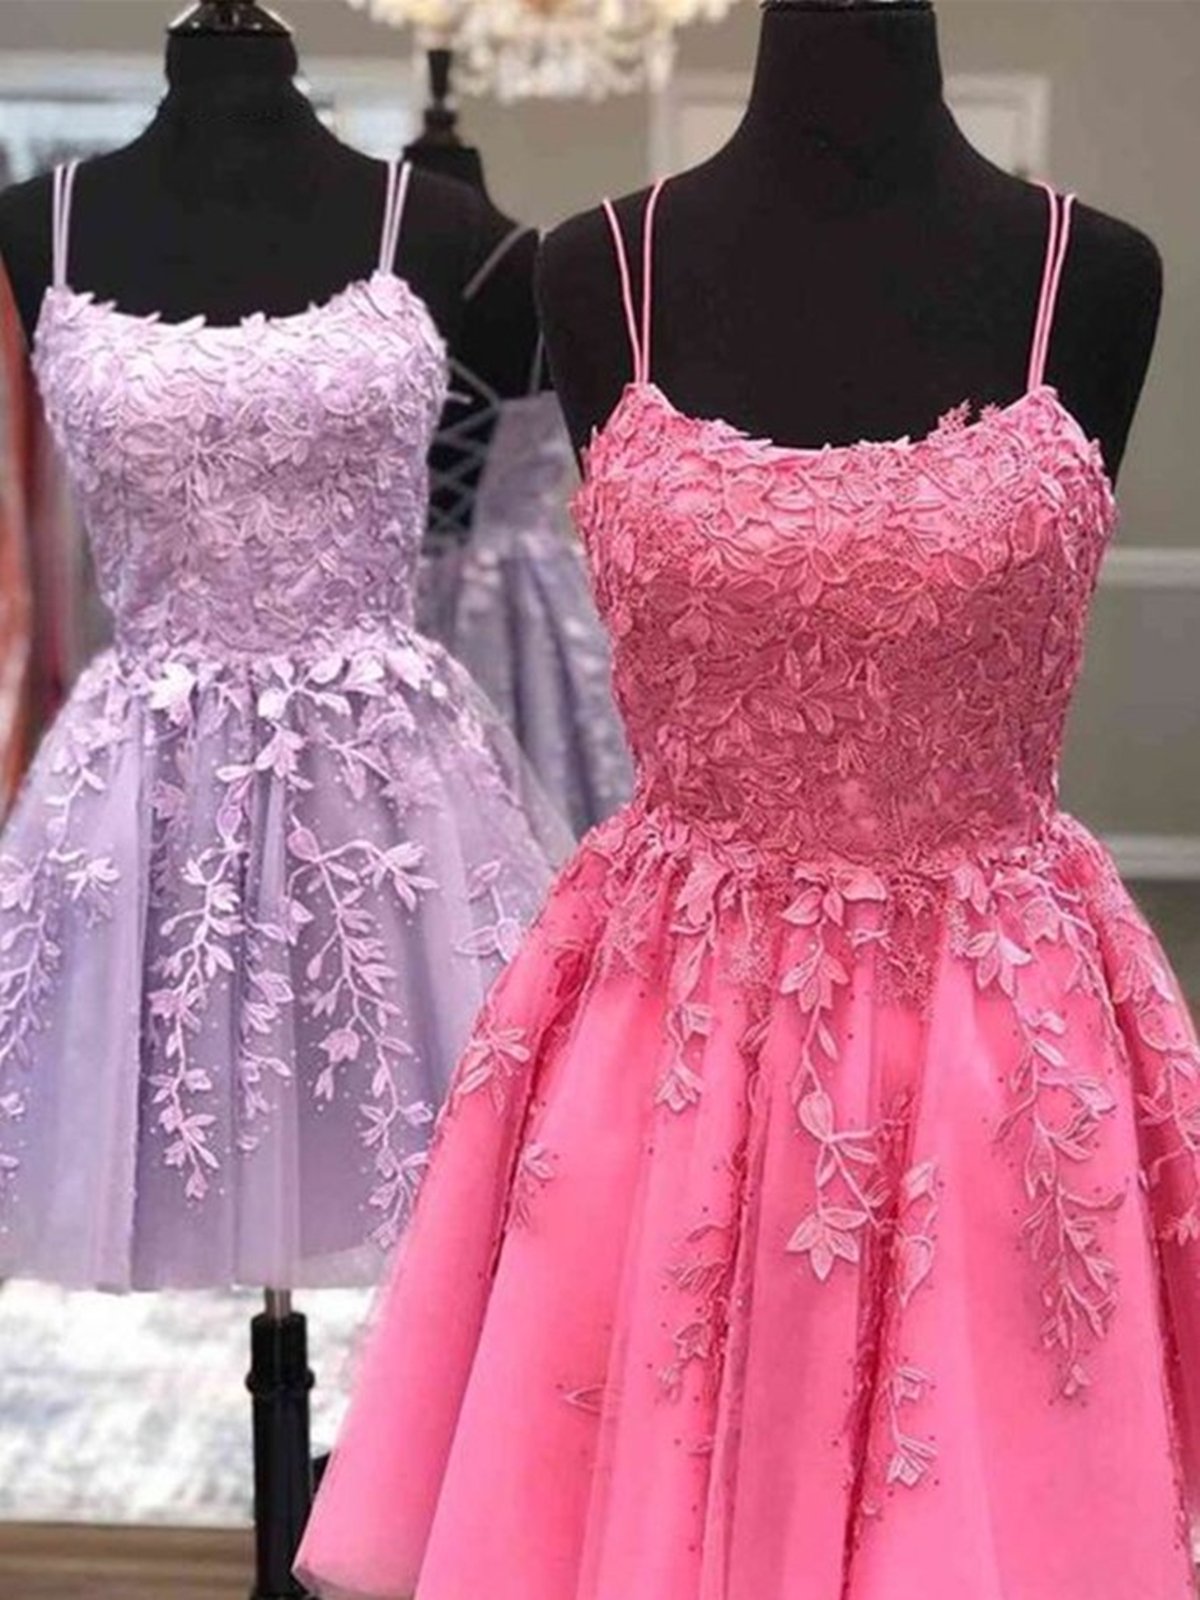 Prom Dresses For 2027, Thin Straps Short Purple Pink Lace Prom Dresses, Short Purple Pink Lace Graduation Homecoming Dresses